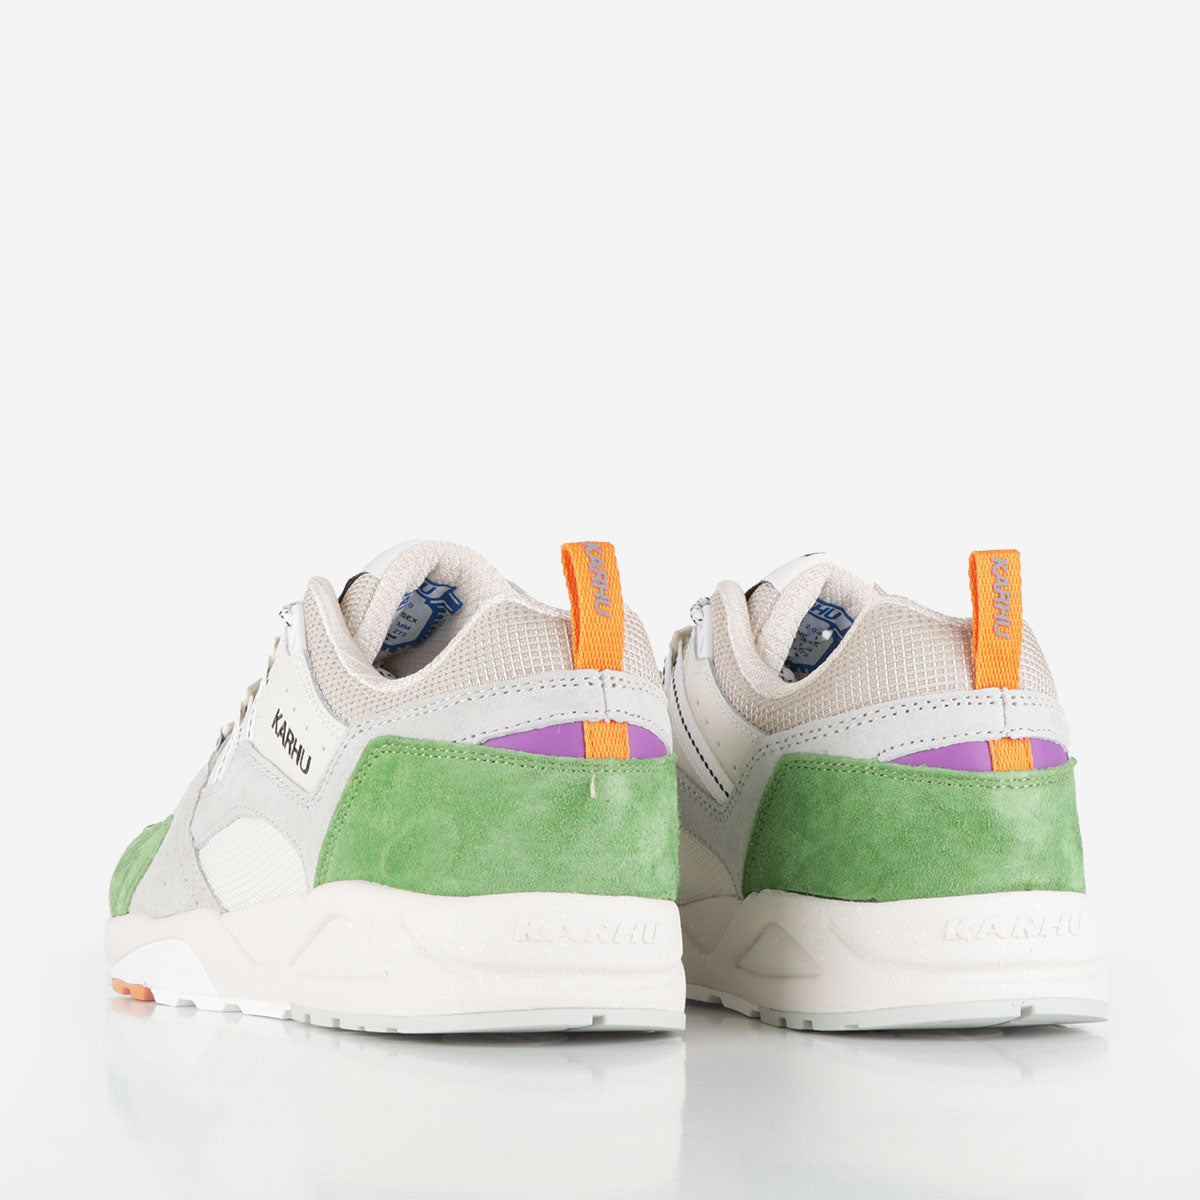 Karhu Fusion 2.0 'Flow State Pack' Shoes